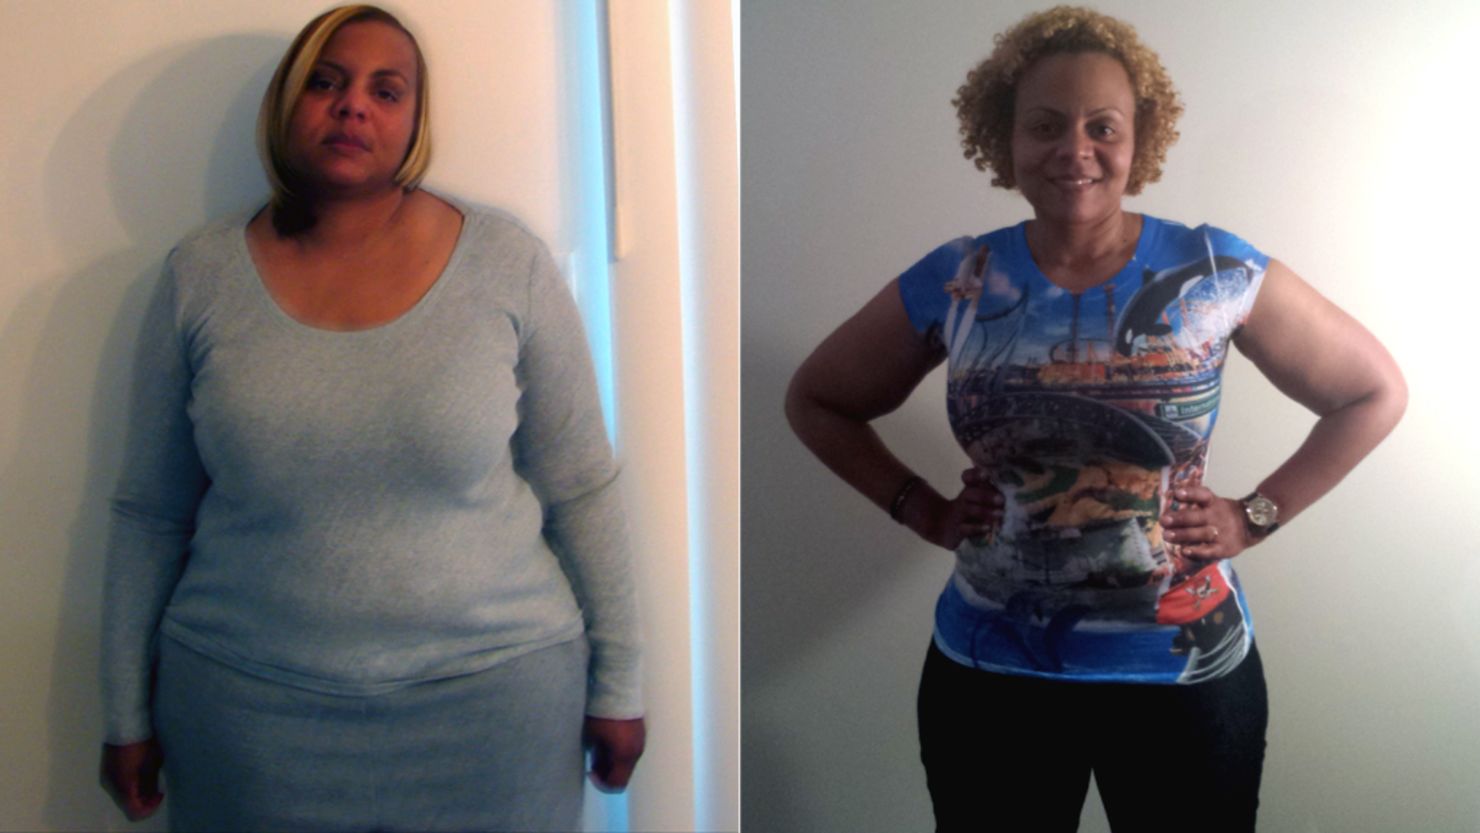 At her heaviest, Fit Nation participant Karen Manns weighed  268 pounds. Today she's 202 pounds. 